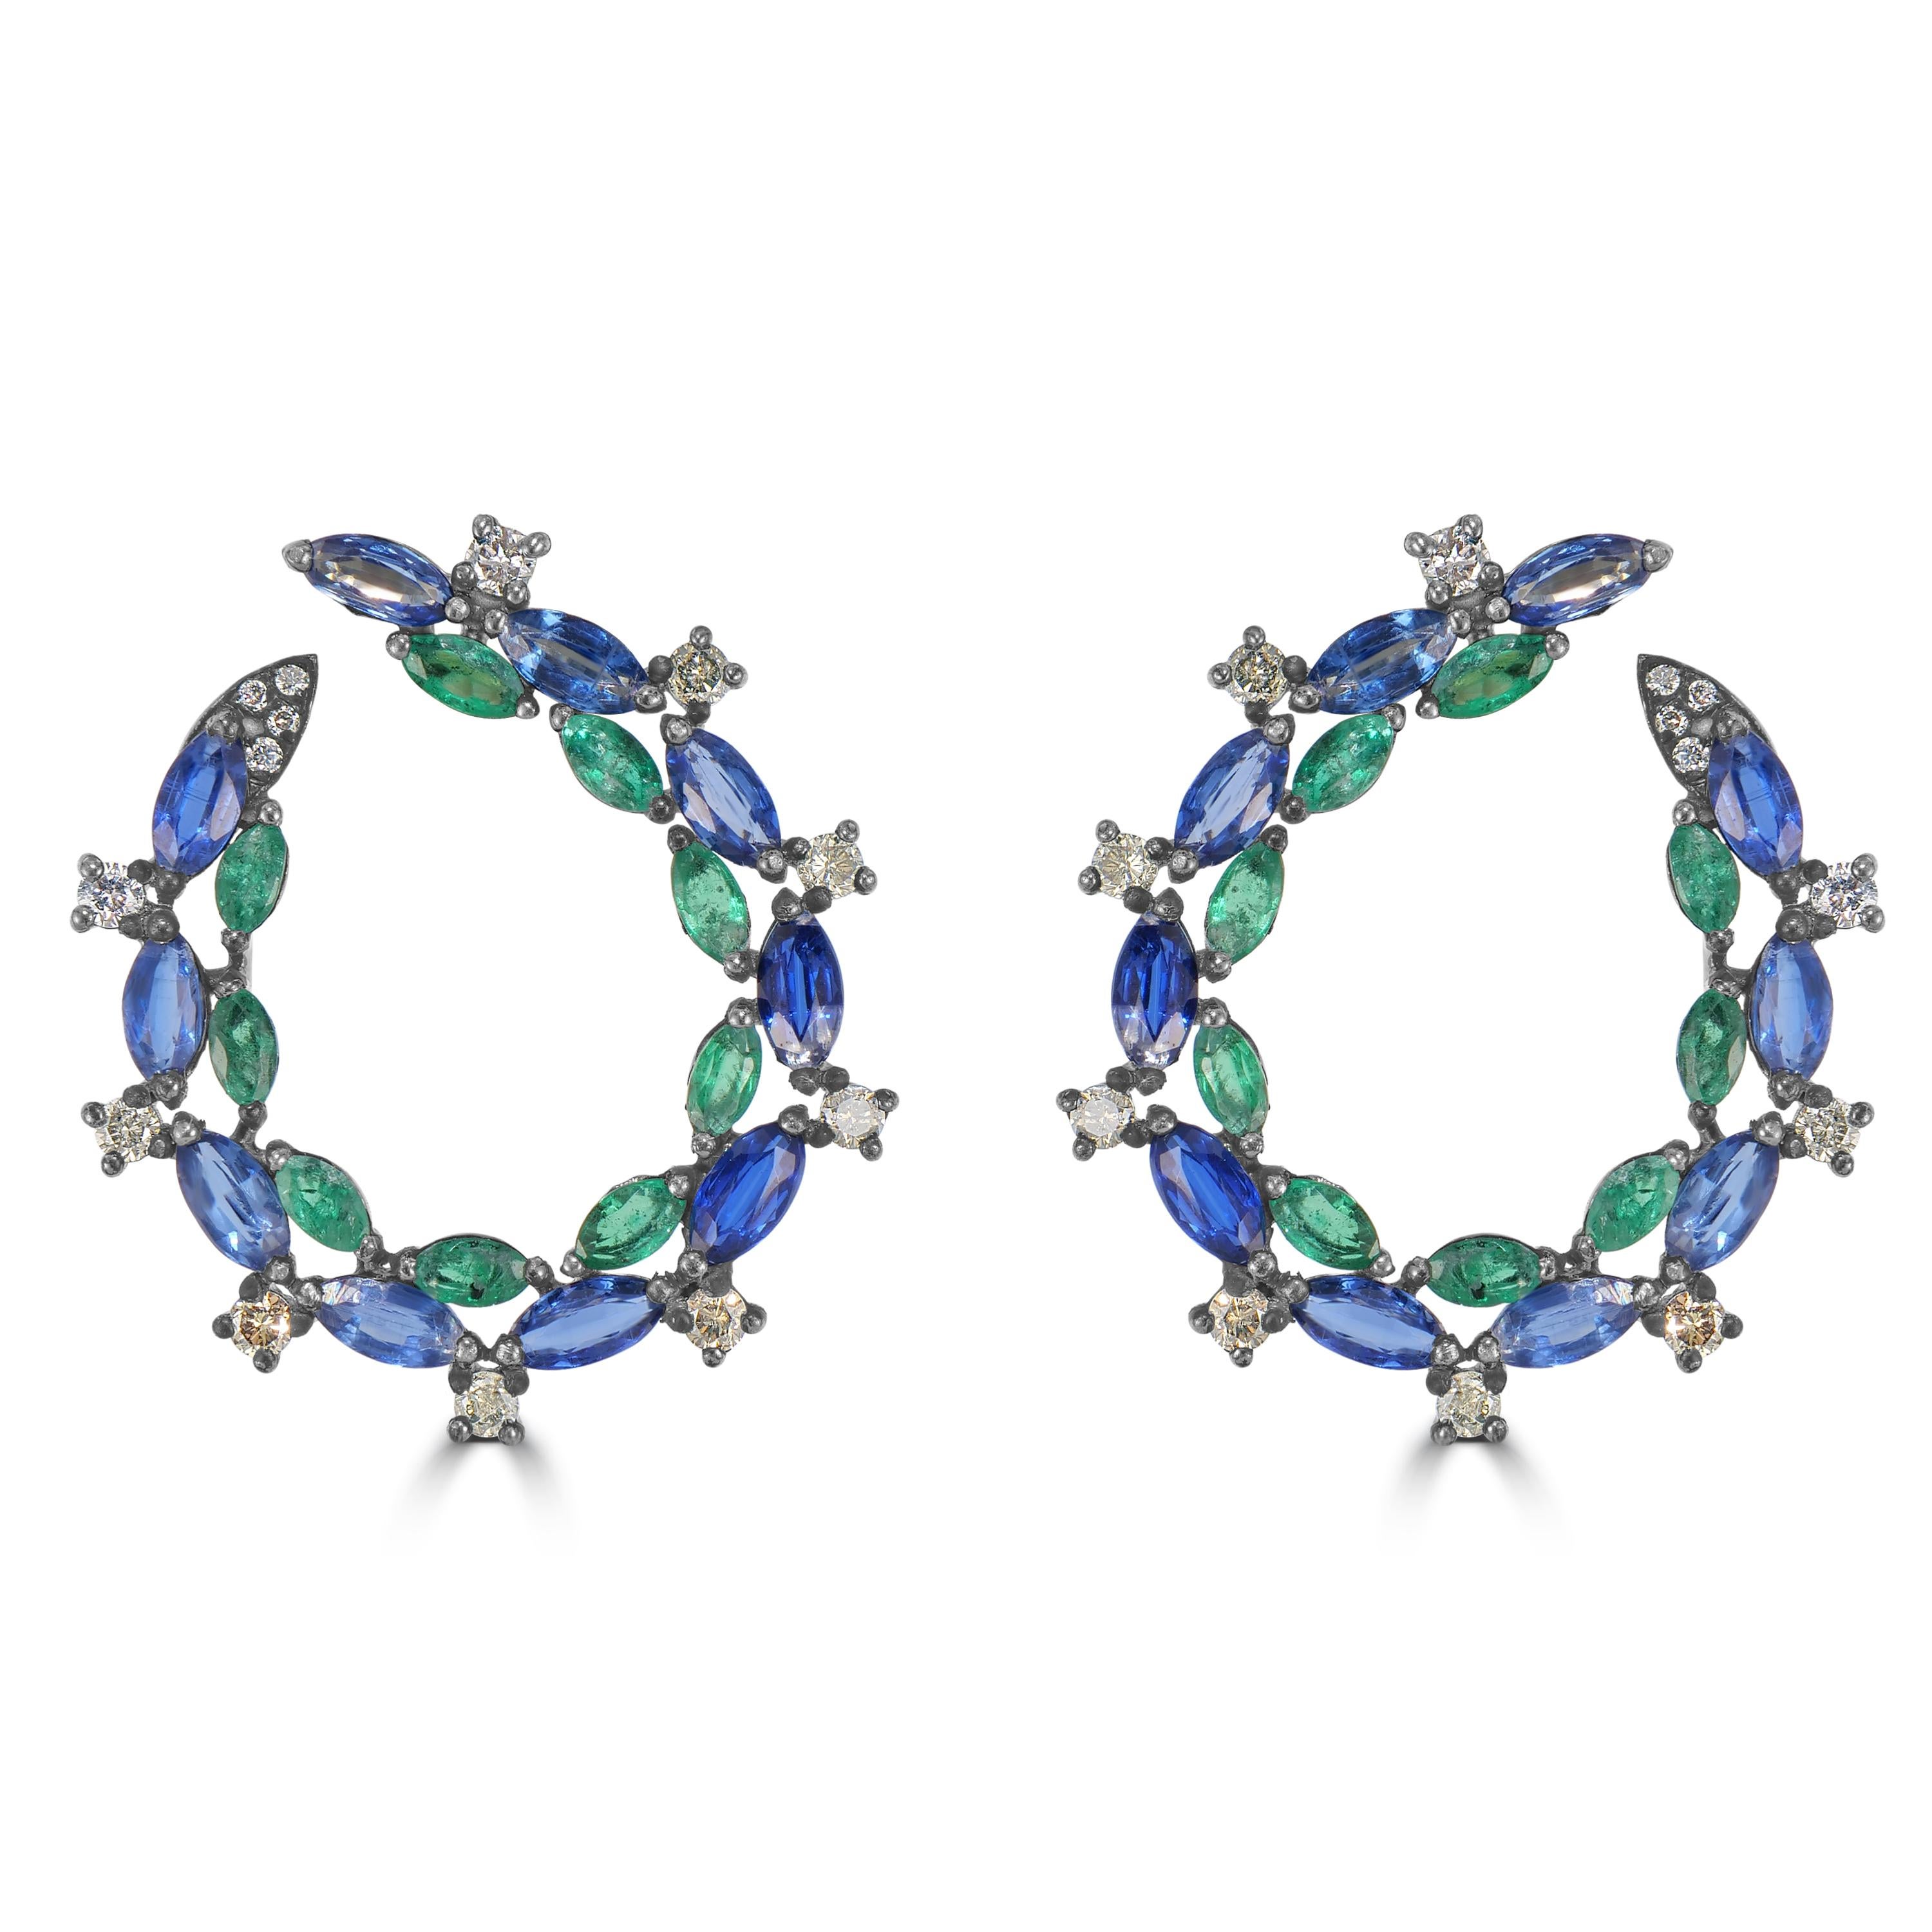 Victorian 6.3 Cttw. Emerald, Kyanite and Diamond Hoop Earrings in18k/925 In New Condition For Sale In New York, NY